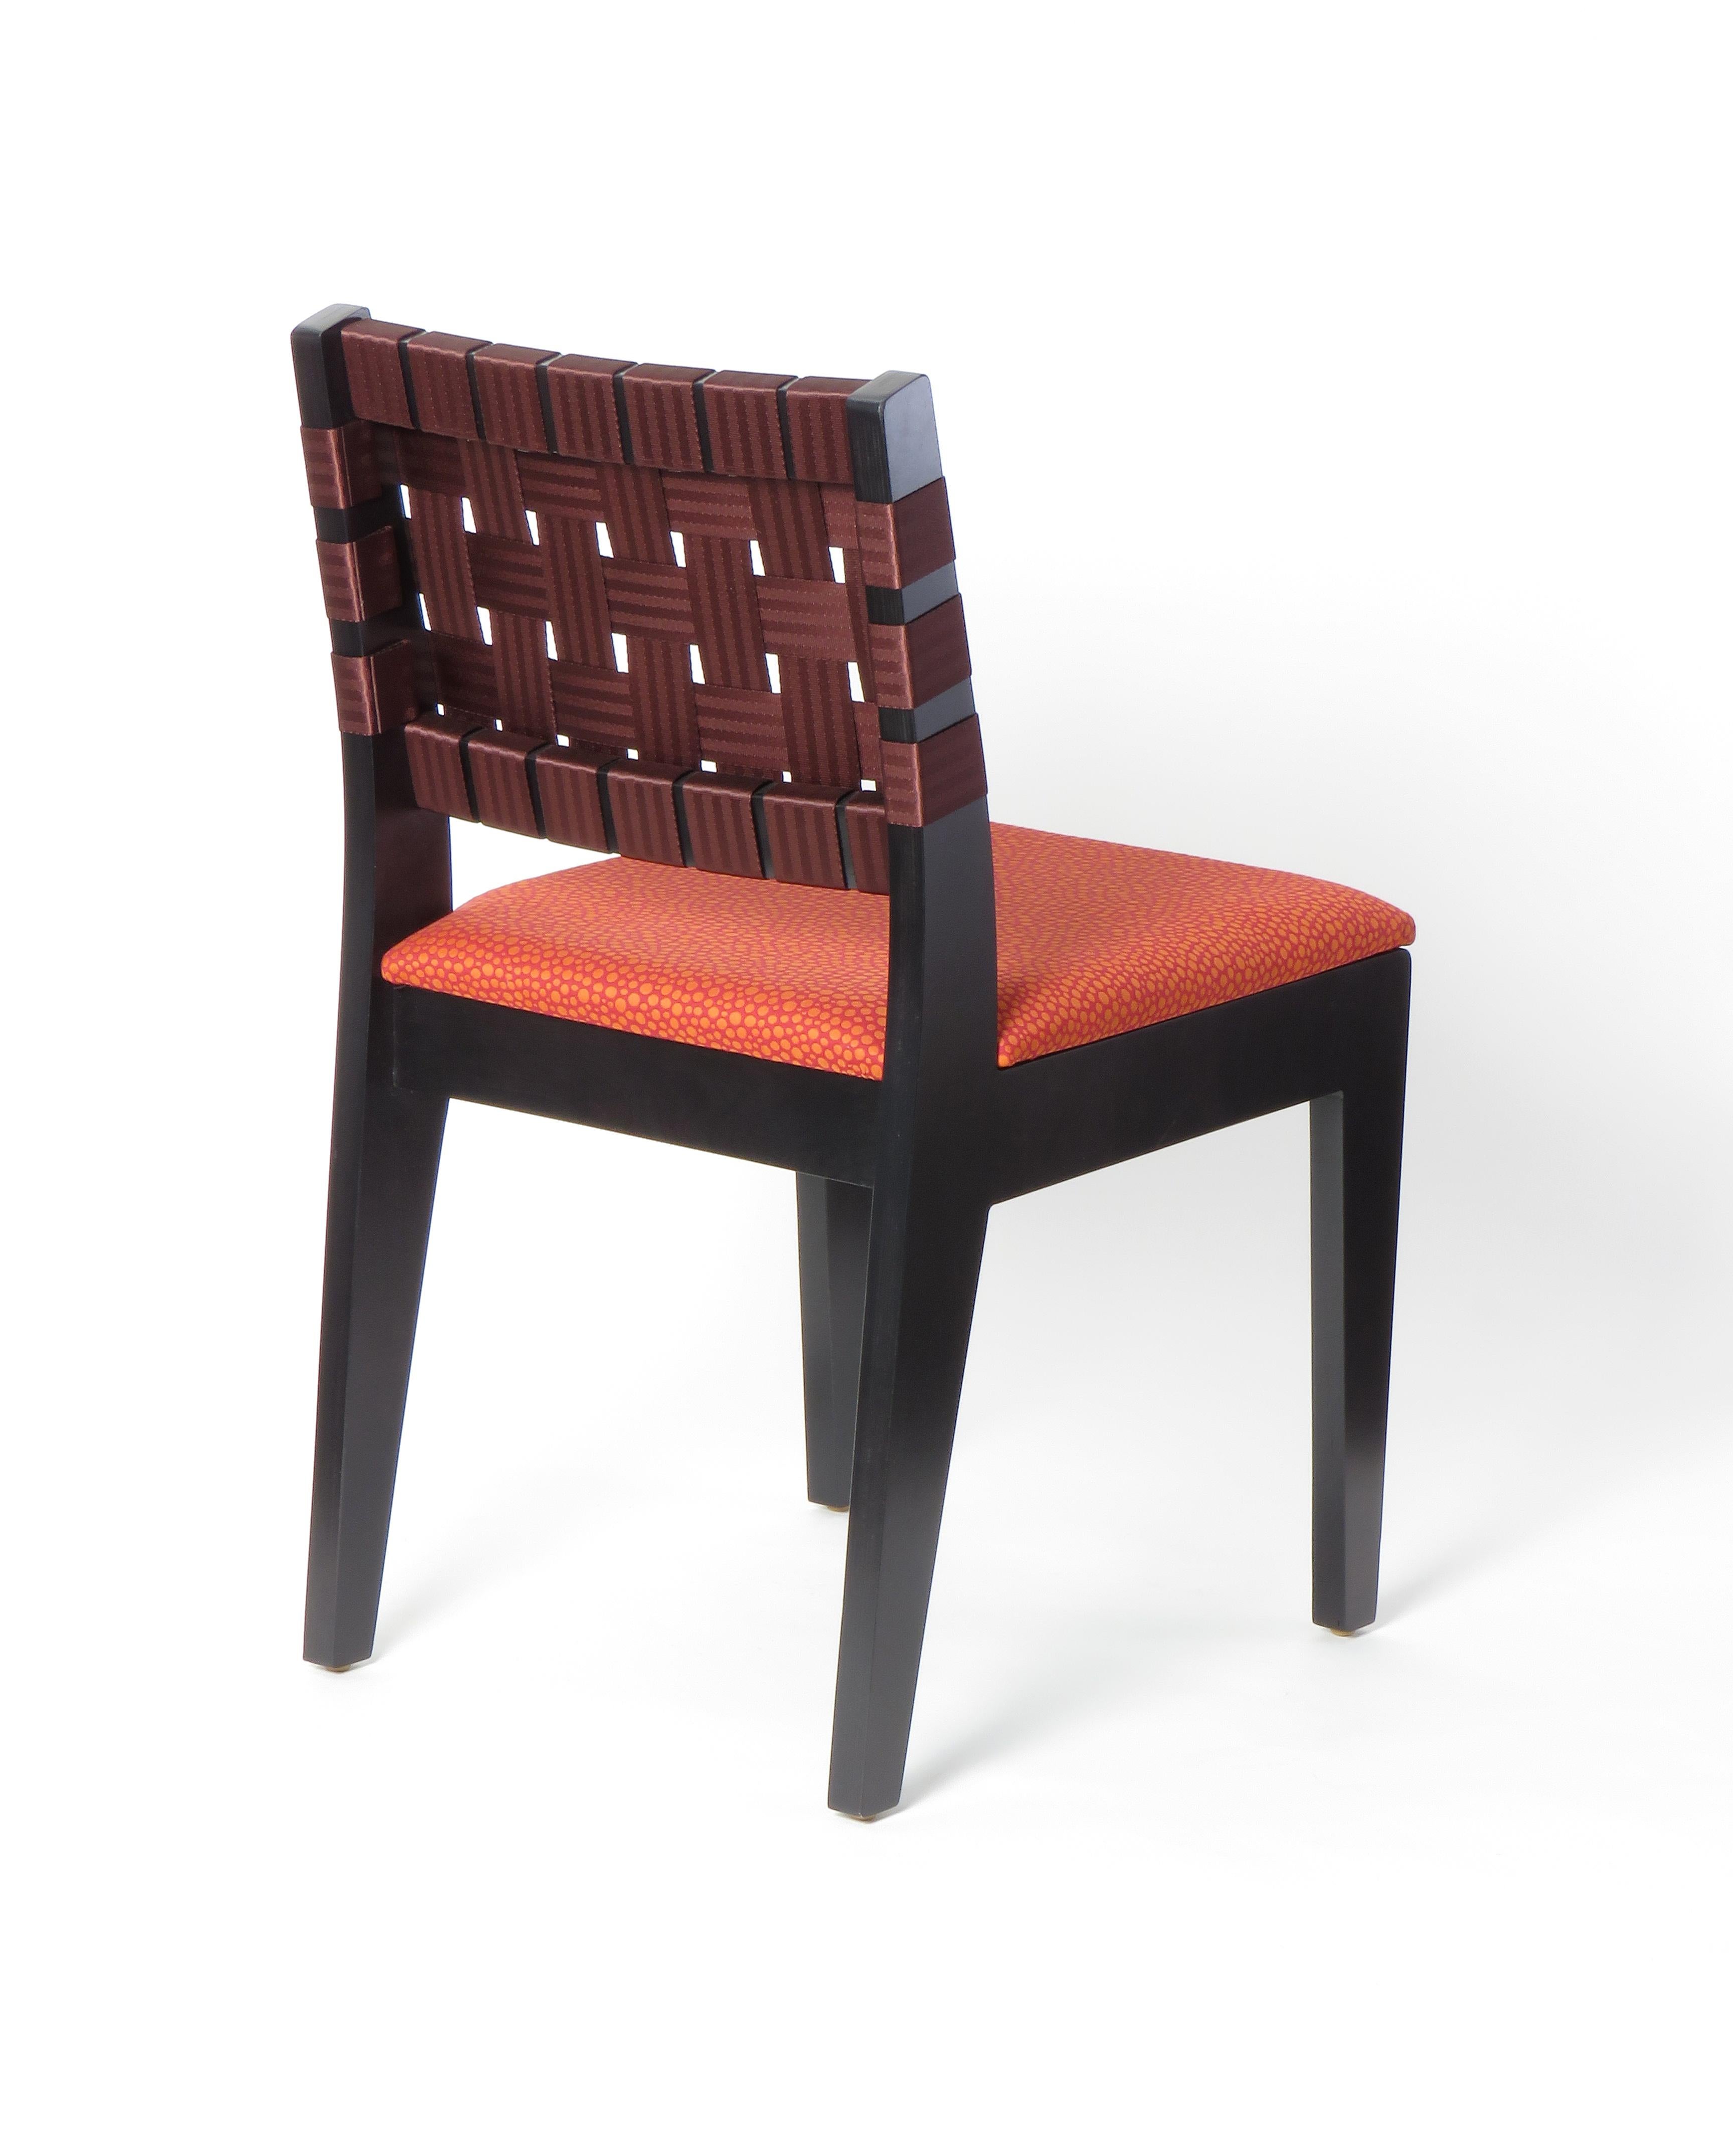 Maple Side Chair in Black Finish with Red Woven Seat and Back by Peter Danko For Sale 2